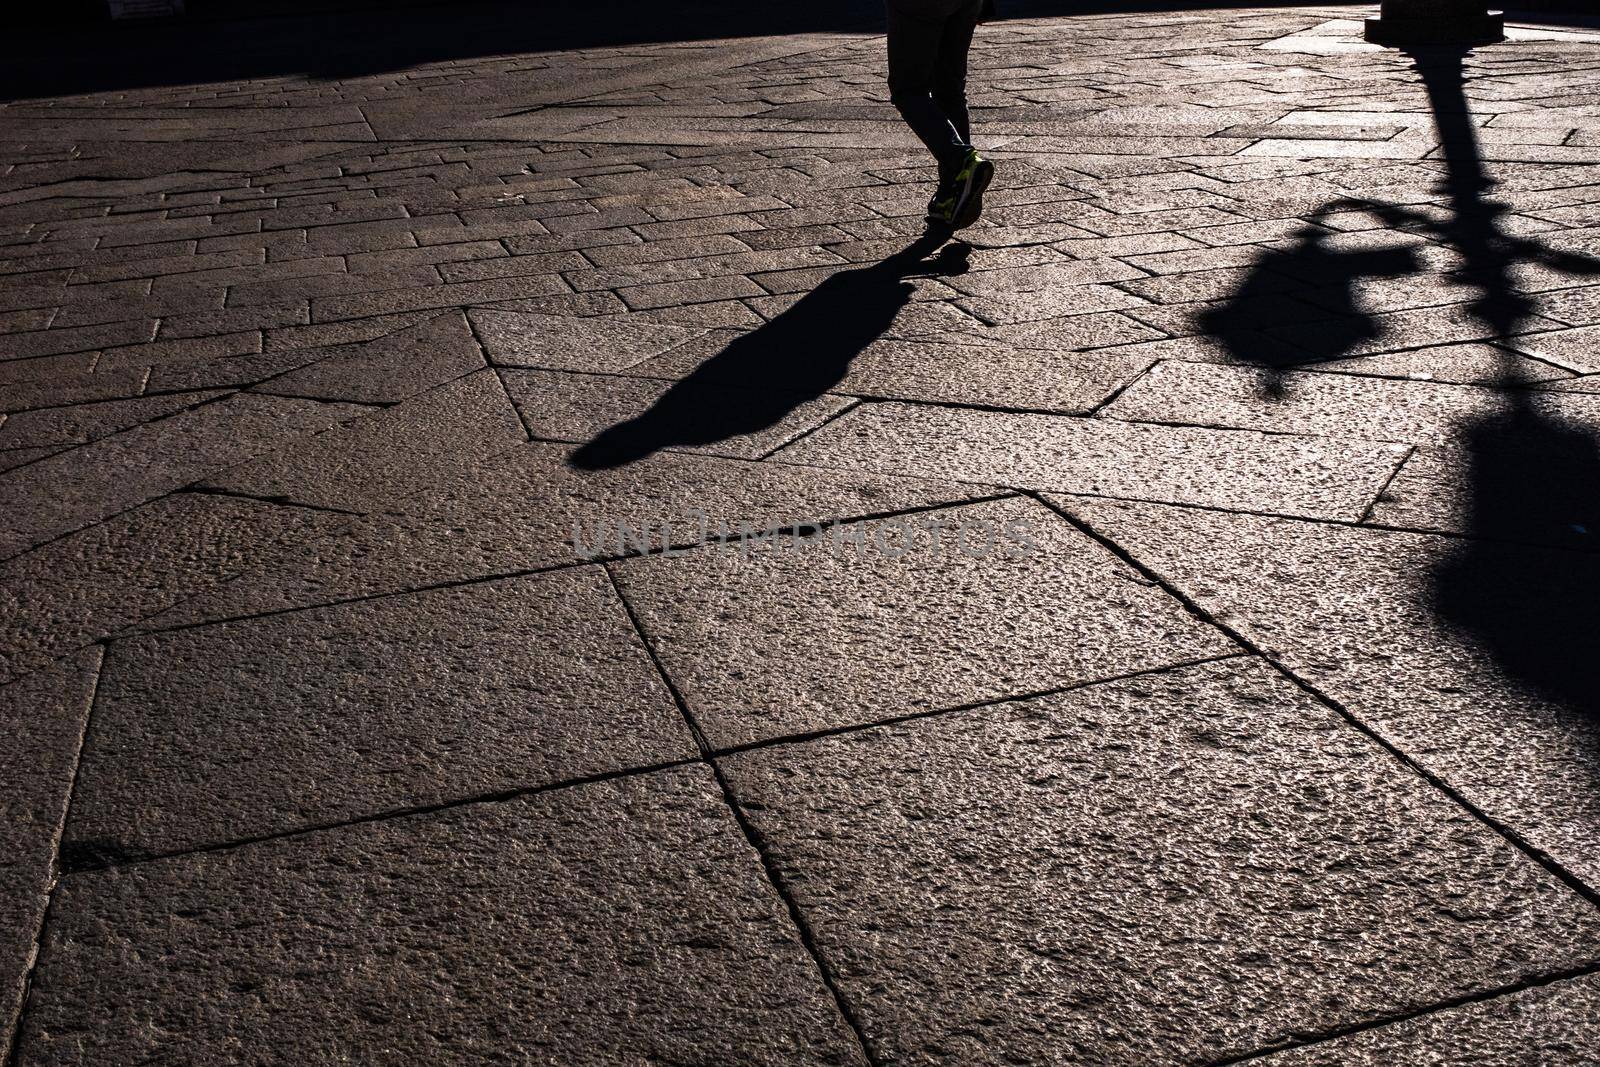 Silhouette of a man and a shadow of a street light on a paving stone in the old town square in Brescia (Italy). by Riccarduska